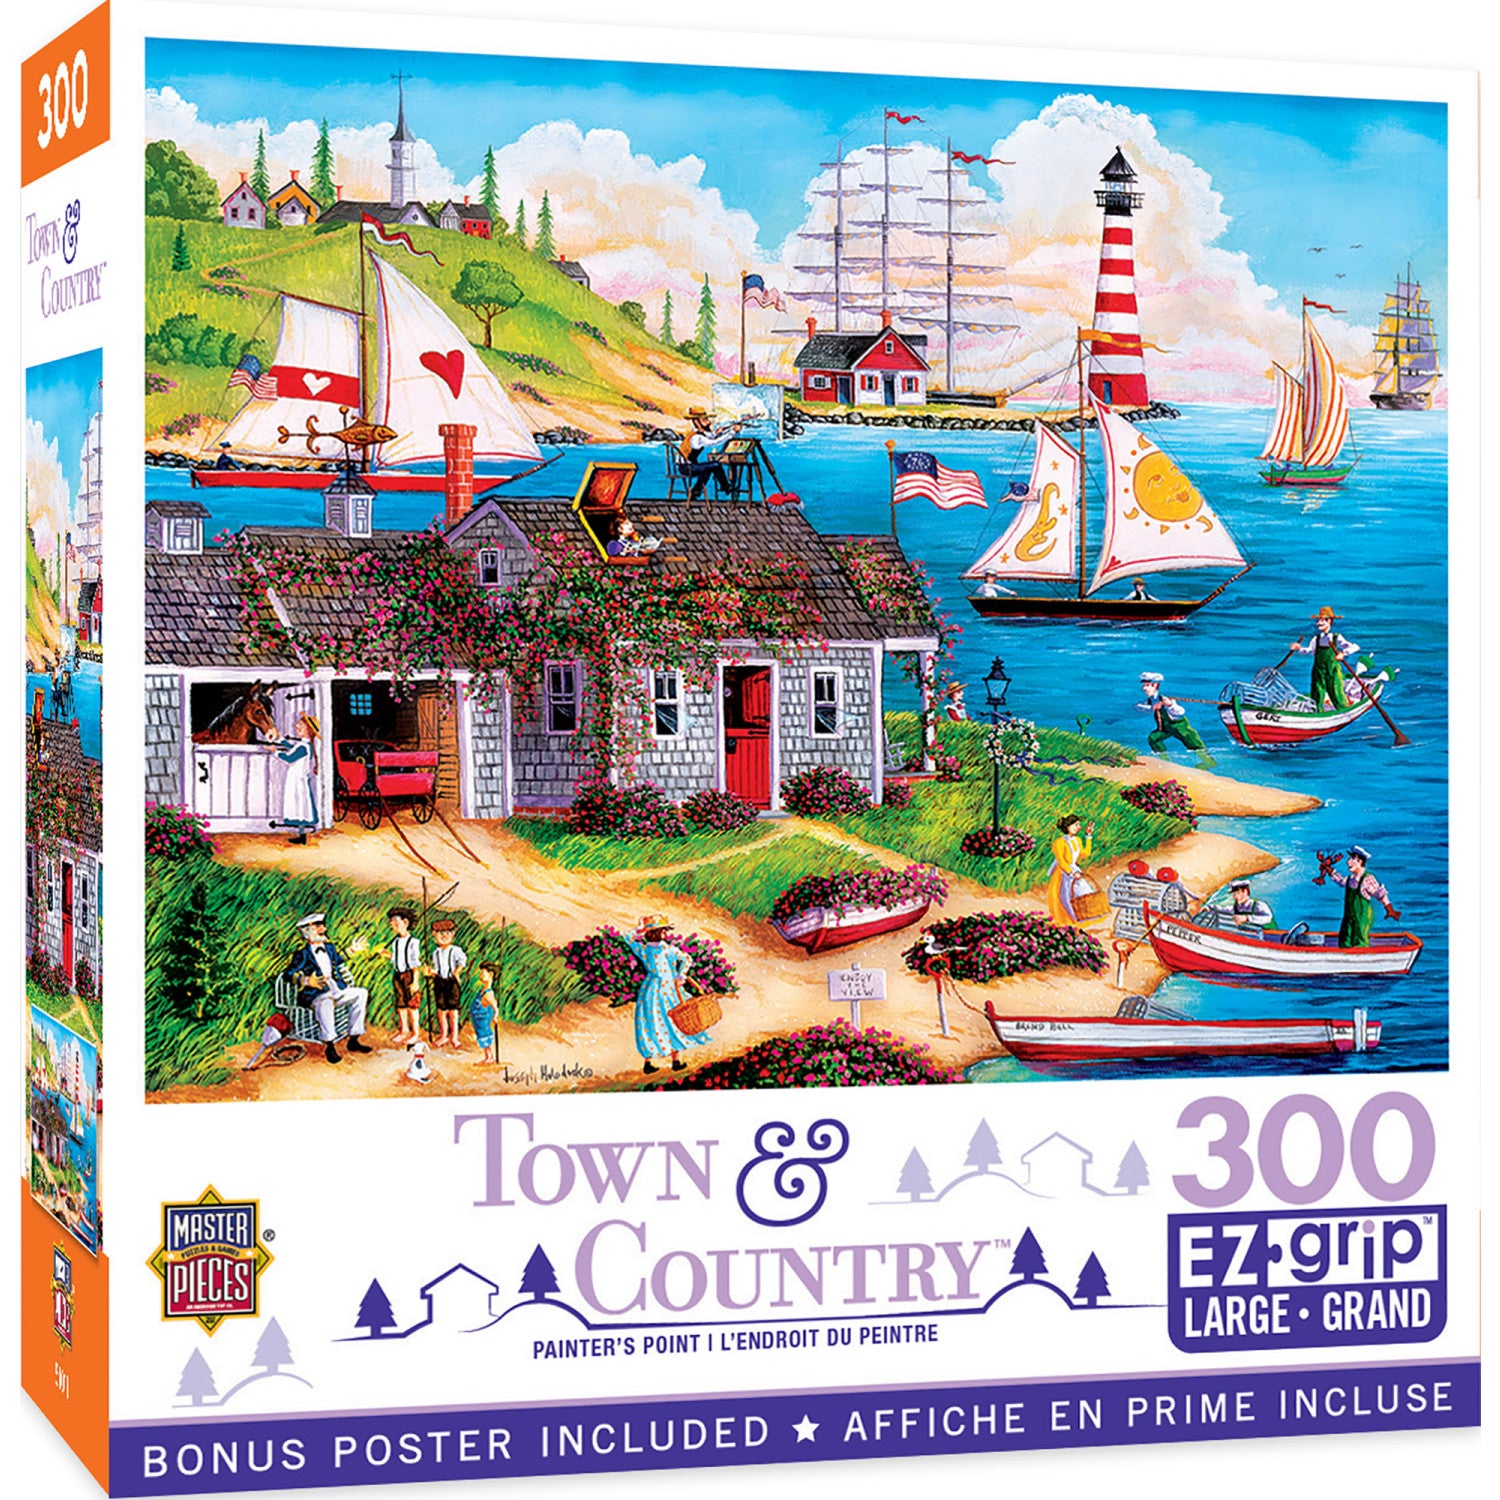 Town & Country - Painter's Point 300 Piece EZ Grip Jigsaw Puzzle